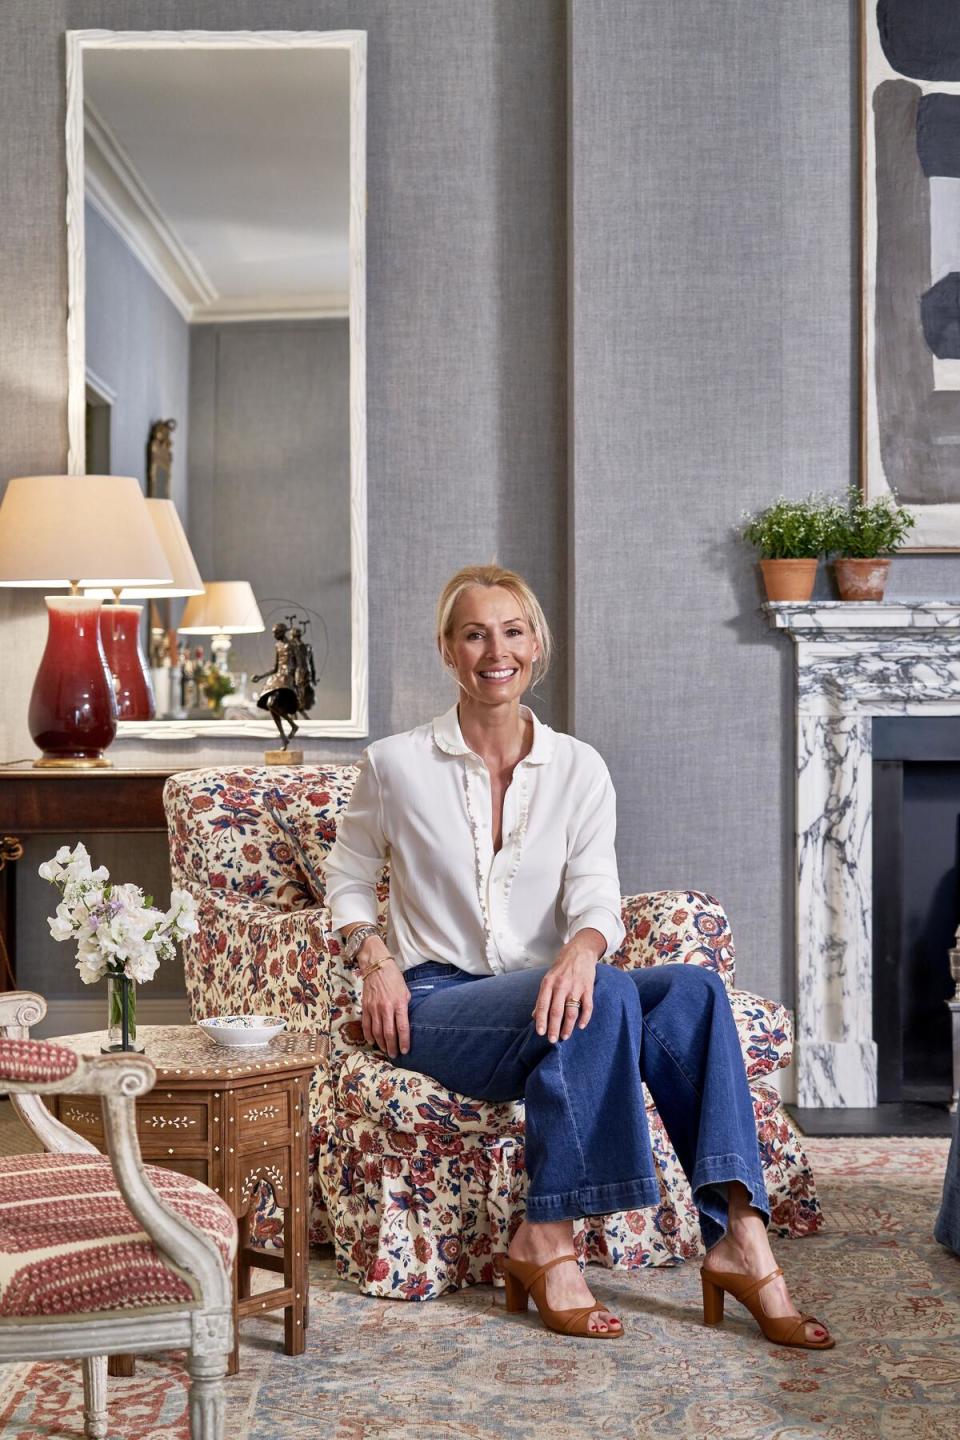 Vanessa Macdonald wrapped the drawing room in blue linen wallpaper, then added antiques and a mix of prints to achieve a quintessentially English look